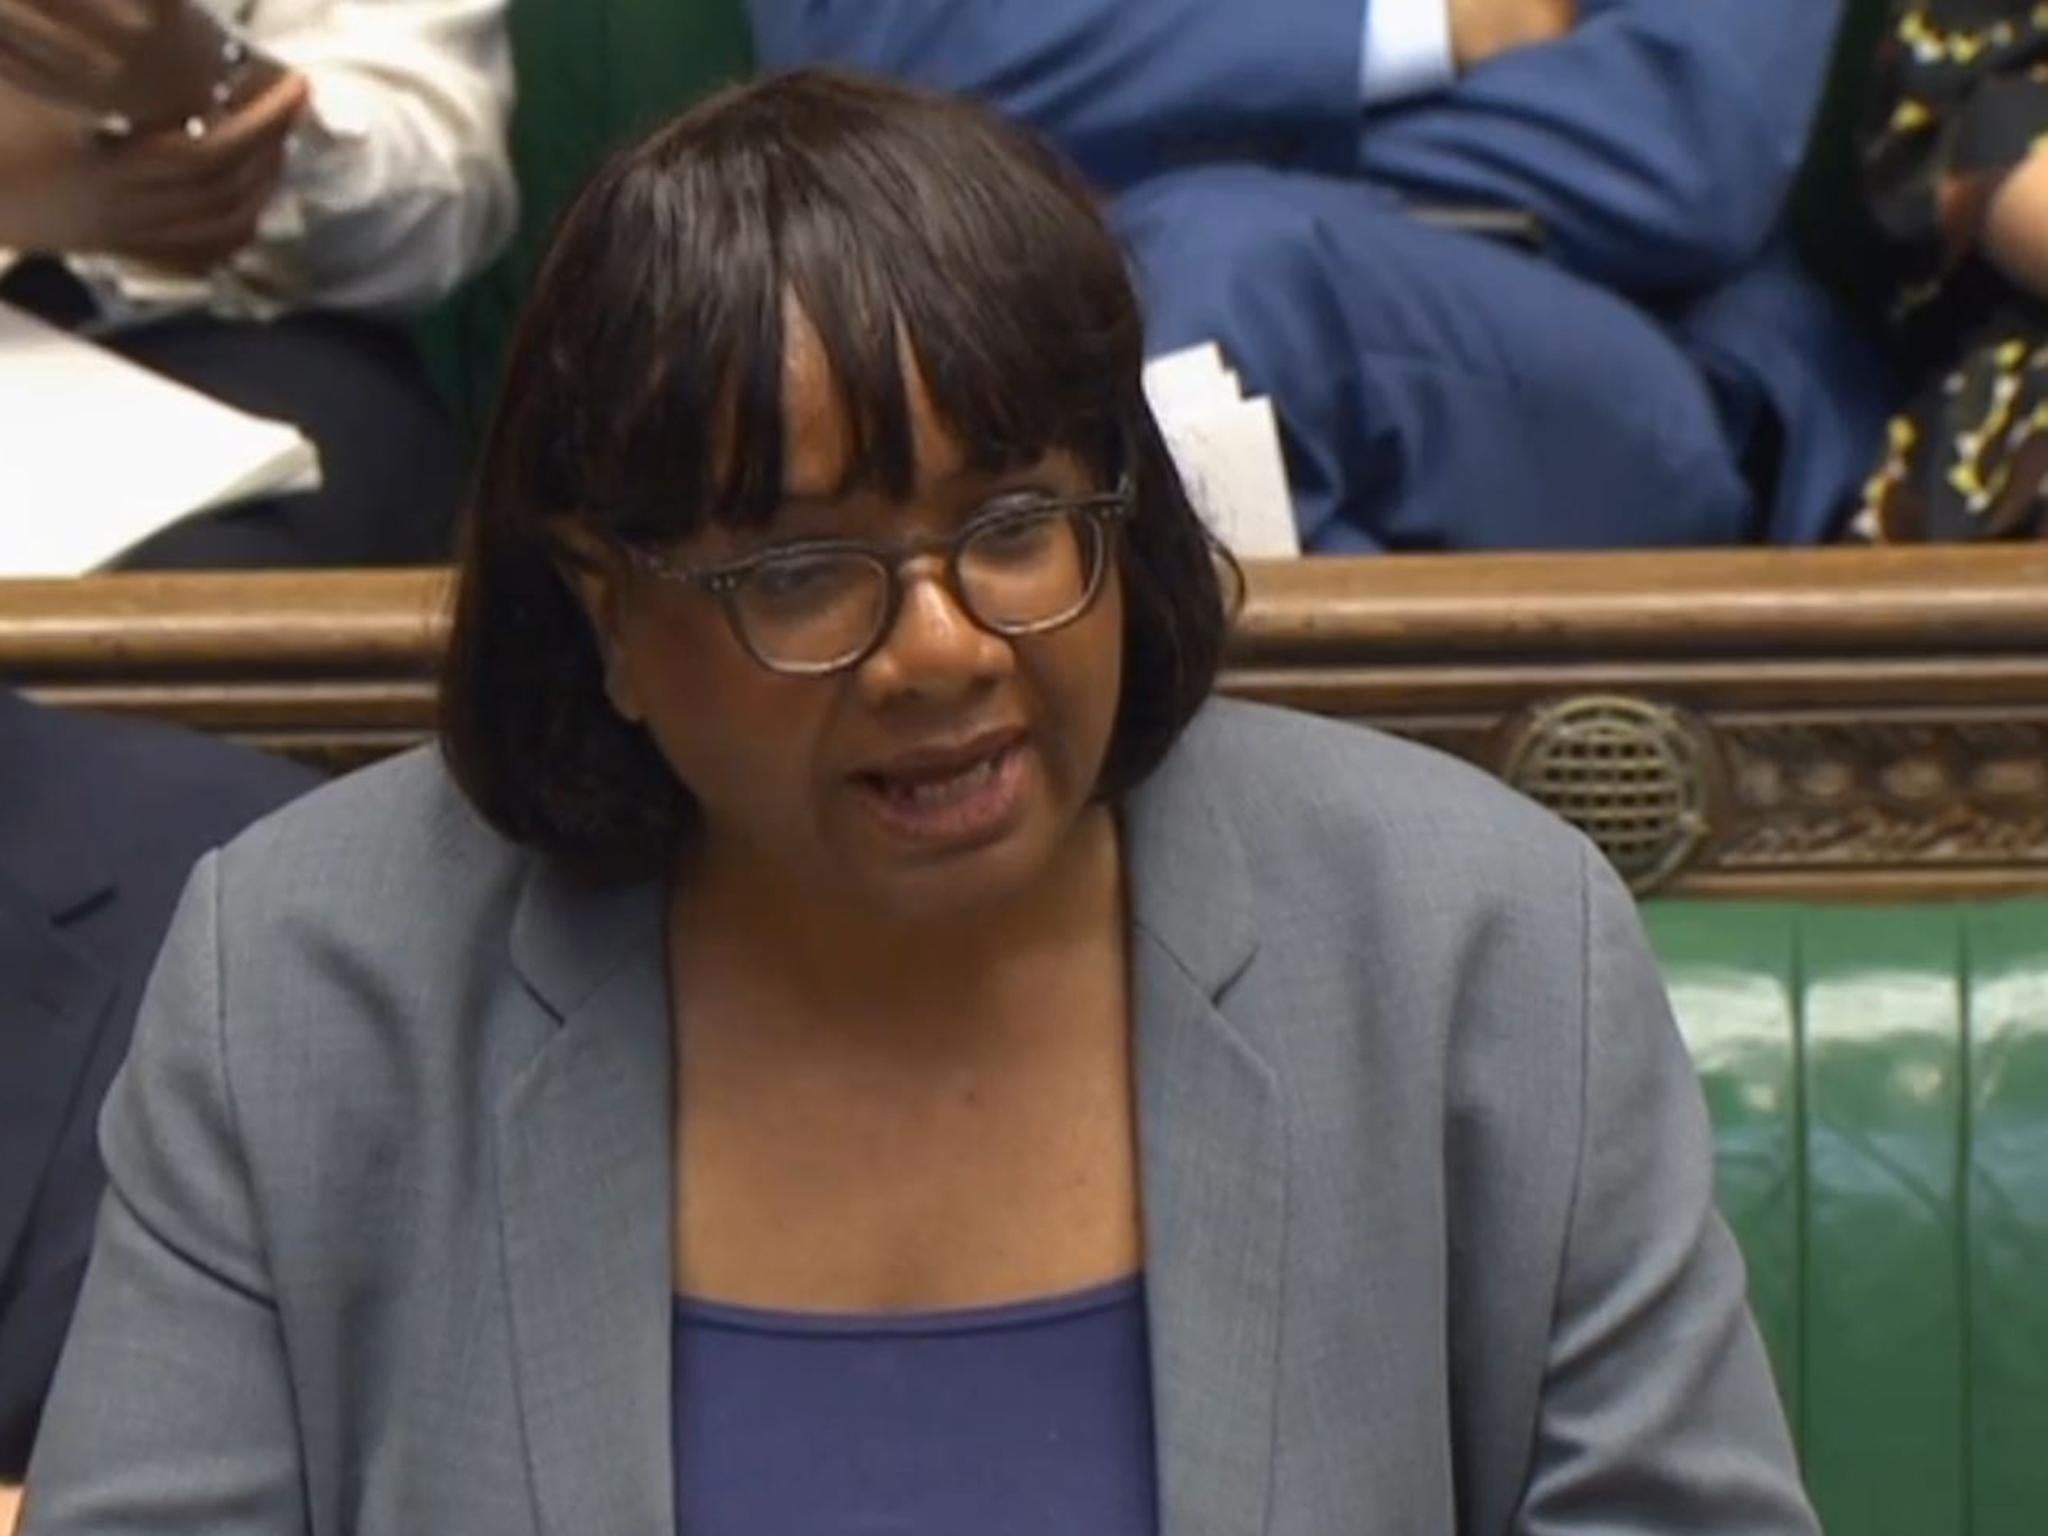 Labour MP Diane Abbott told the committee of the torrent of racist and sexist abuse she has received